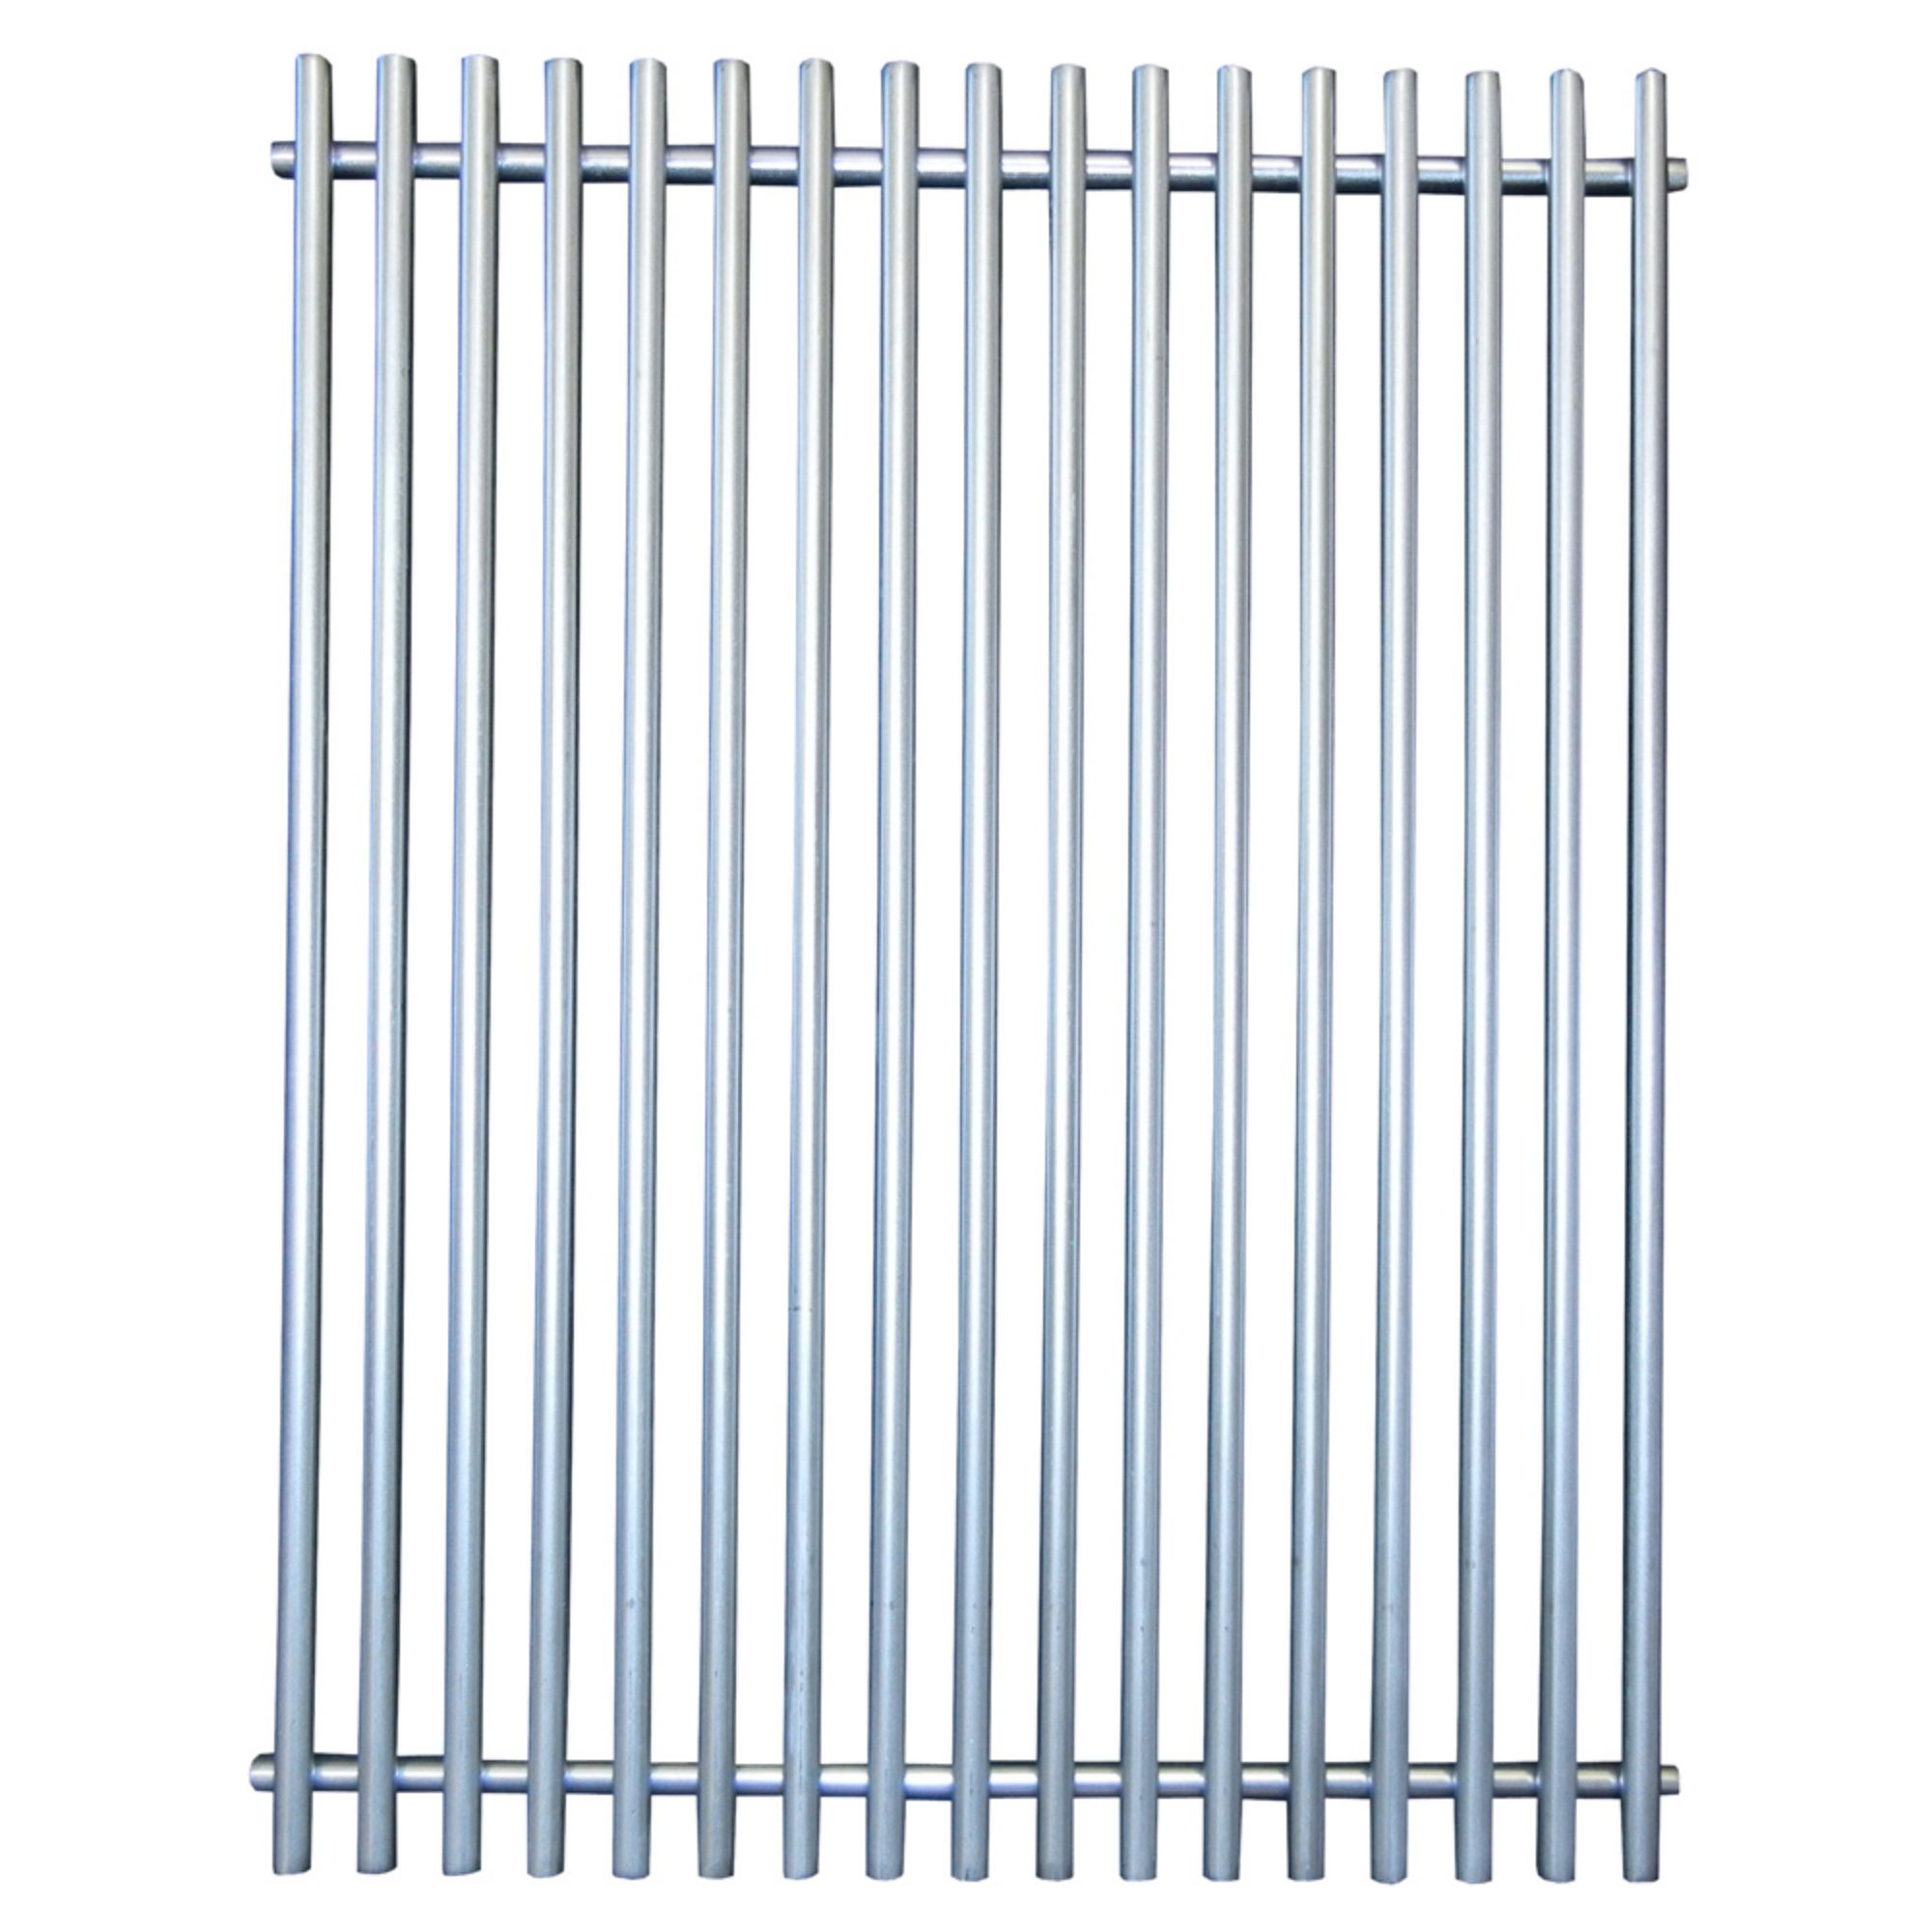 Stainless steel wire cooking grid for Better Homes & Gardens, Weber brand gas grills